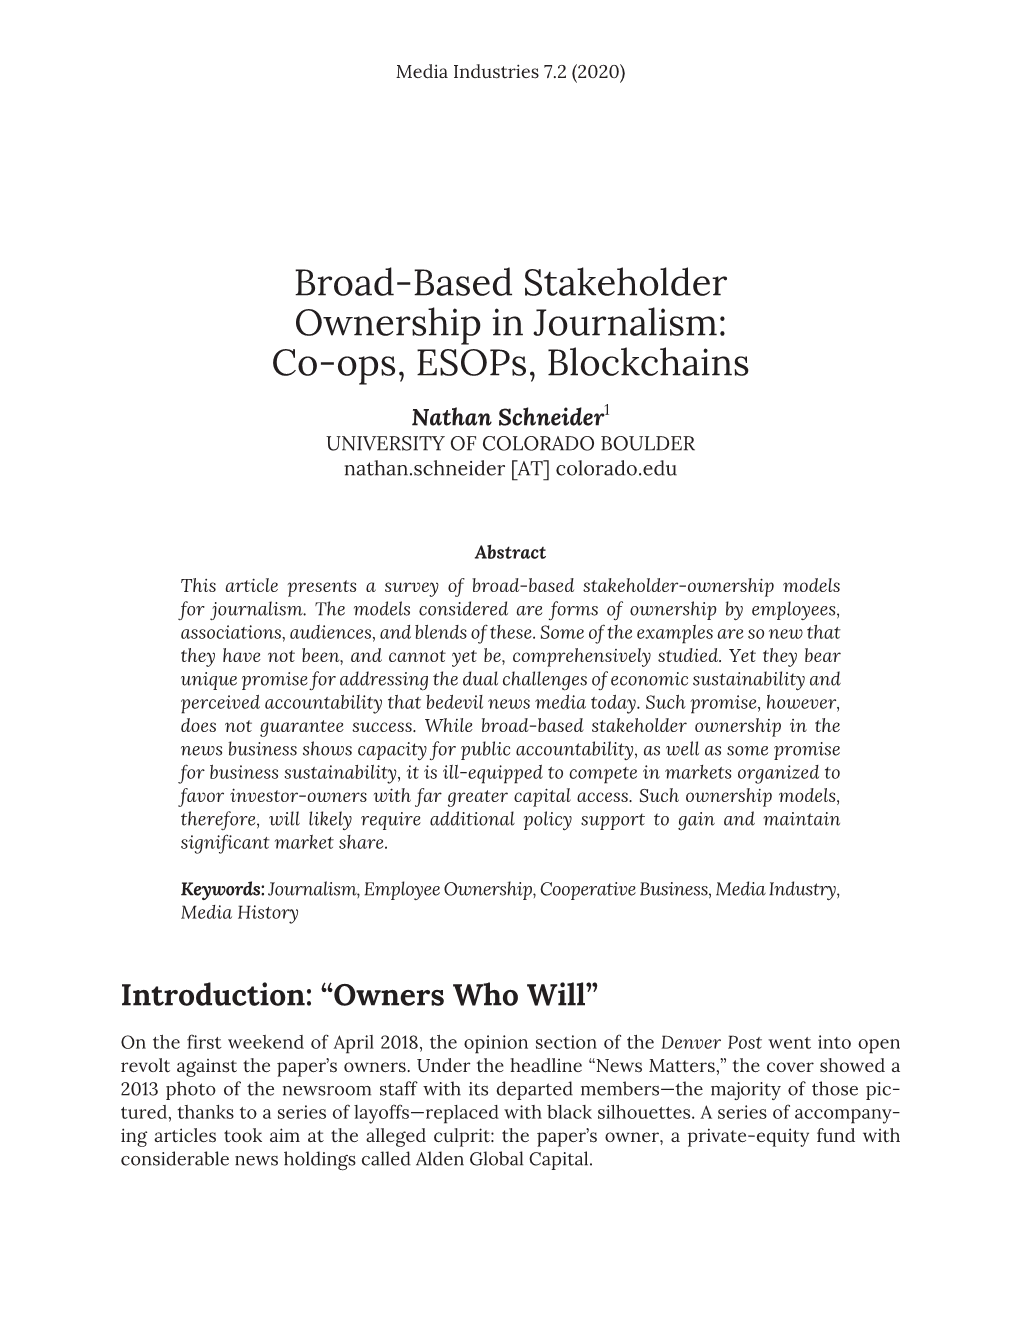 Broad-Based Stakeholder Ownership in Journalism: Co-Ops, Esops, Blockchains